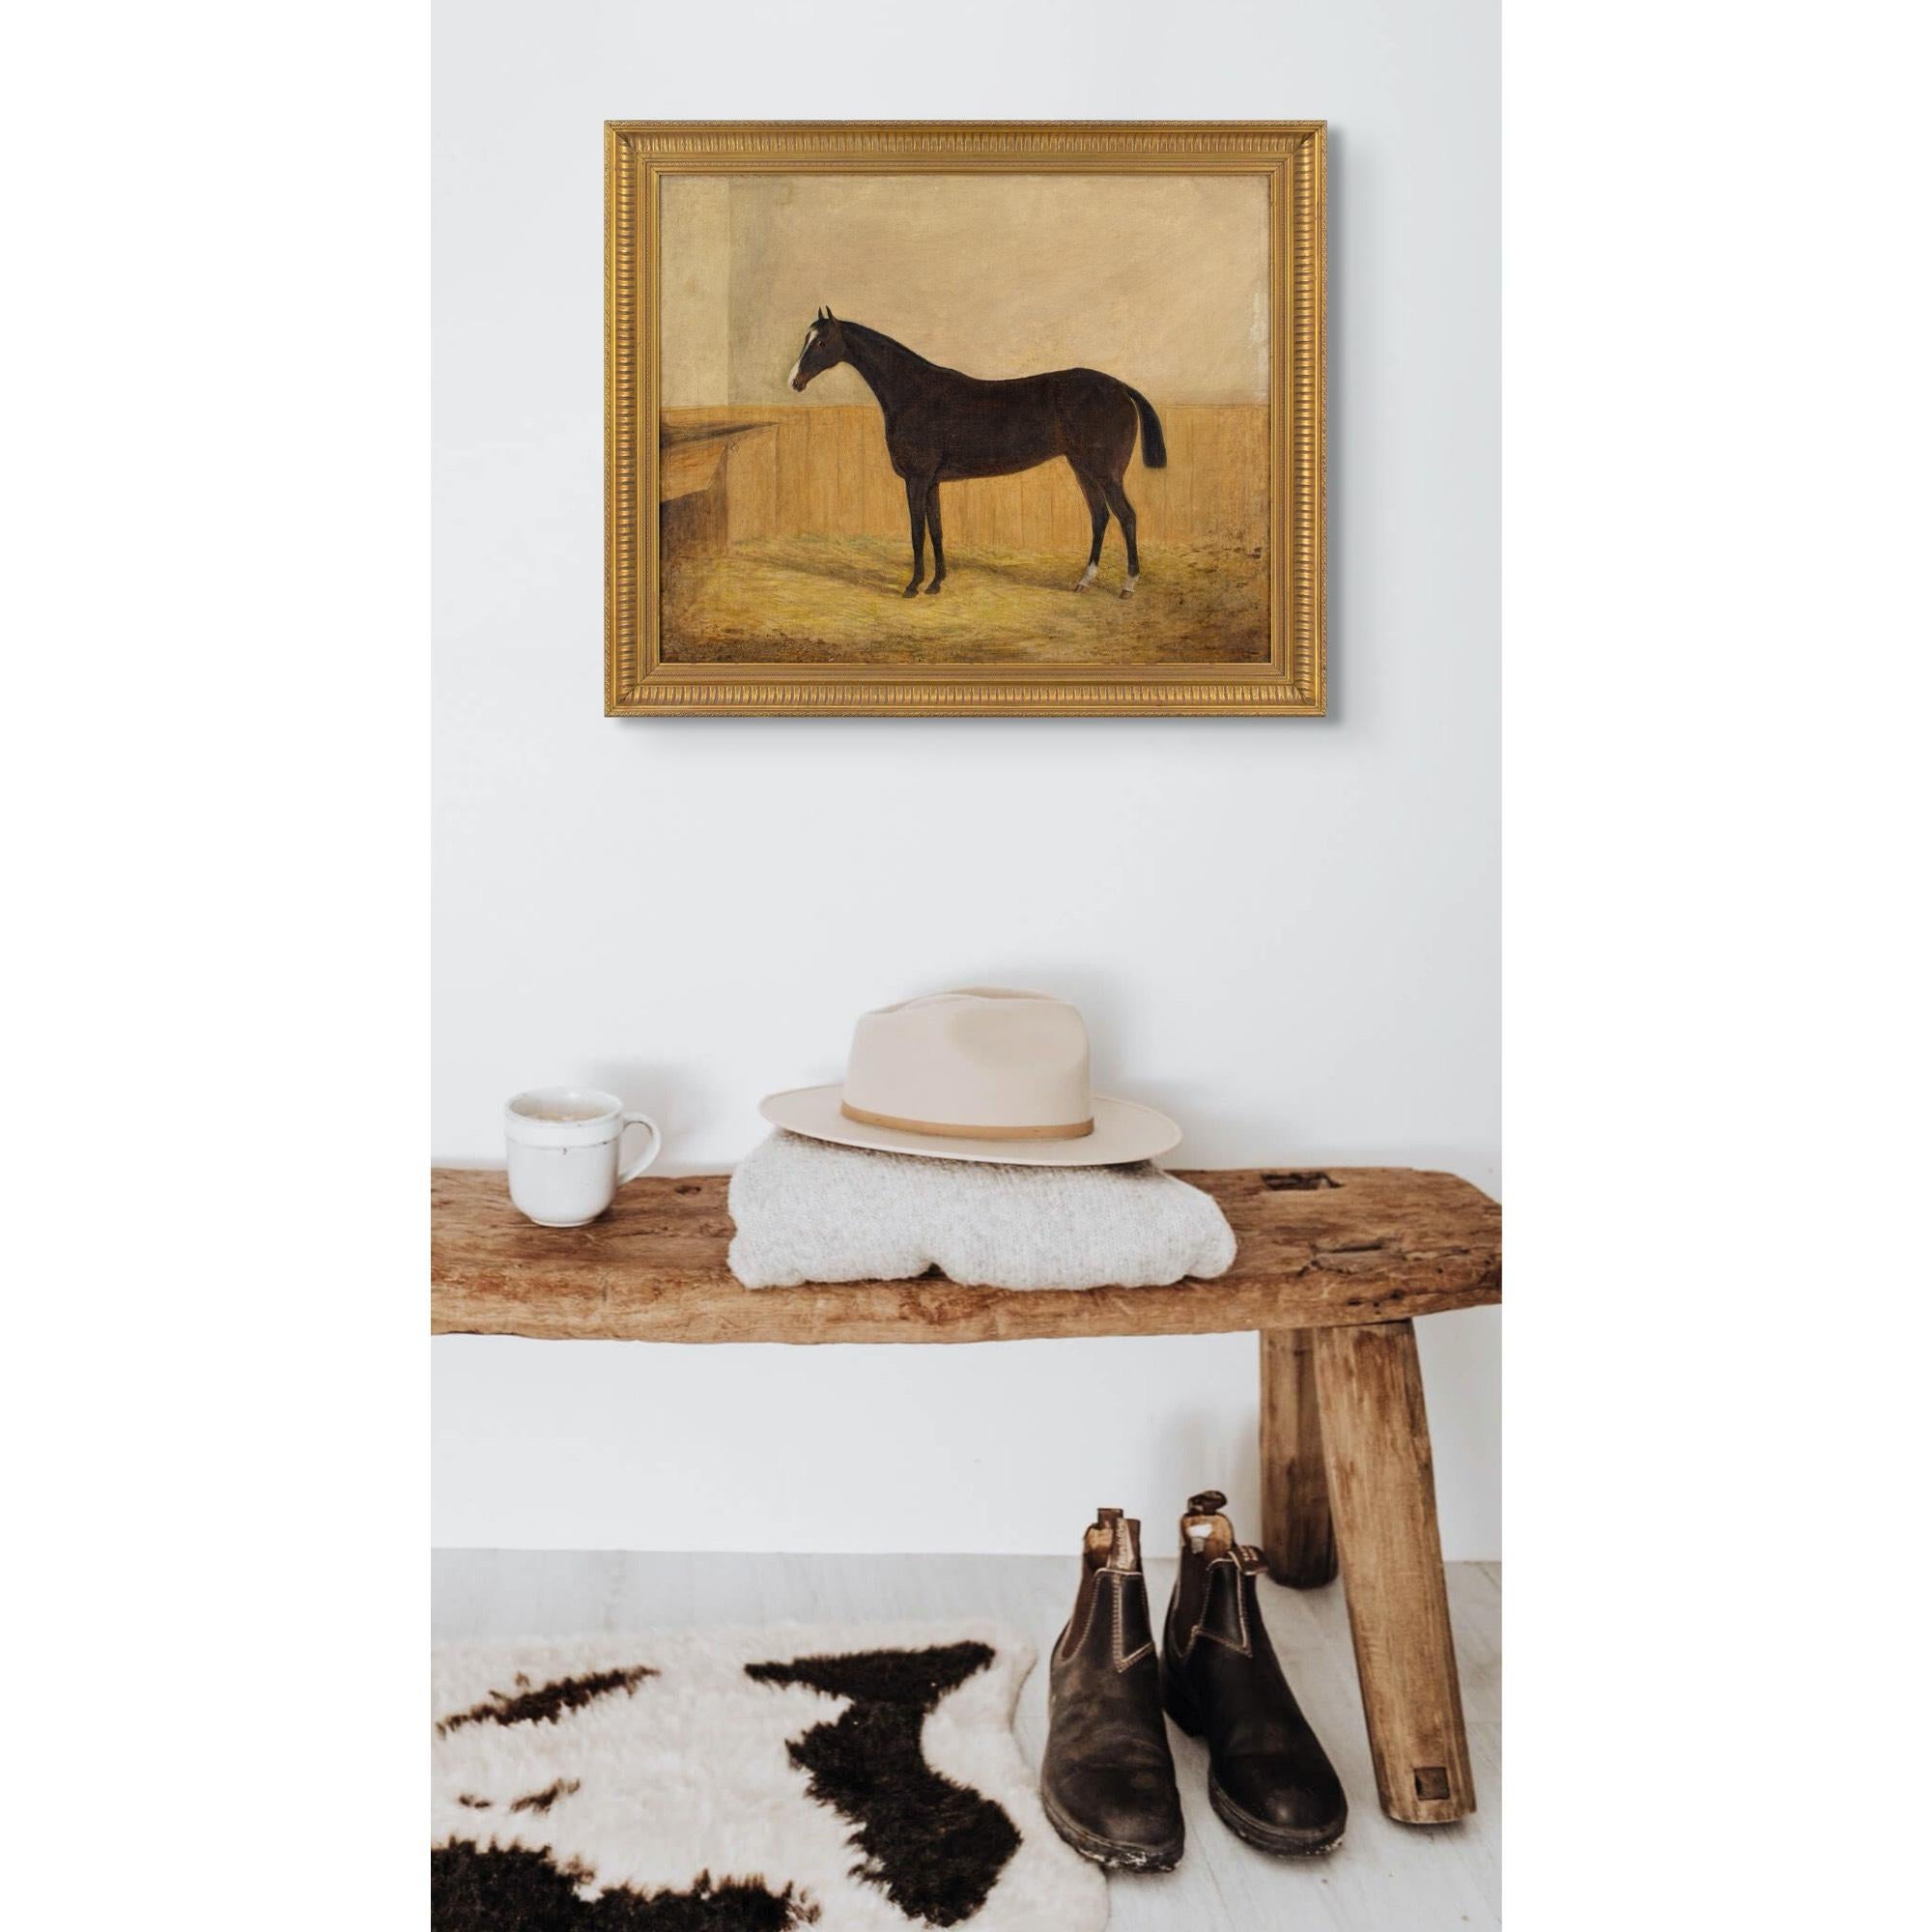 This charming mid-19th-century English oil painting depicts a bay mare within a stable.

Victorians adored their horses, particularly the aristocracy who filled their walls with images of their beloved equines. They were significant members of the